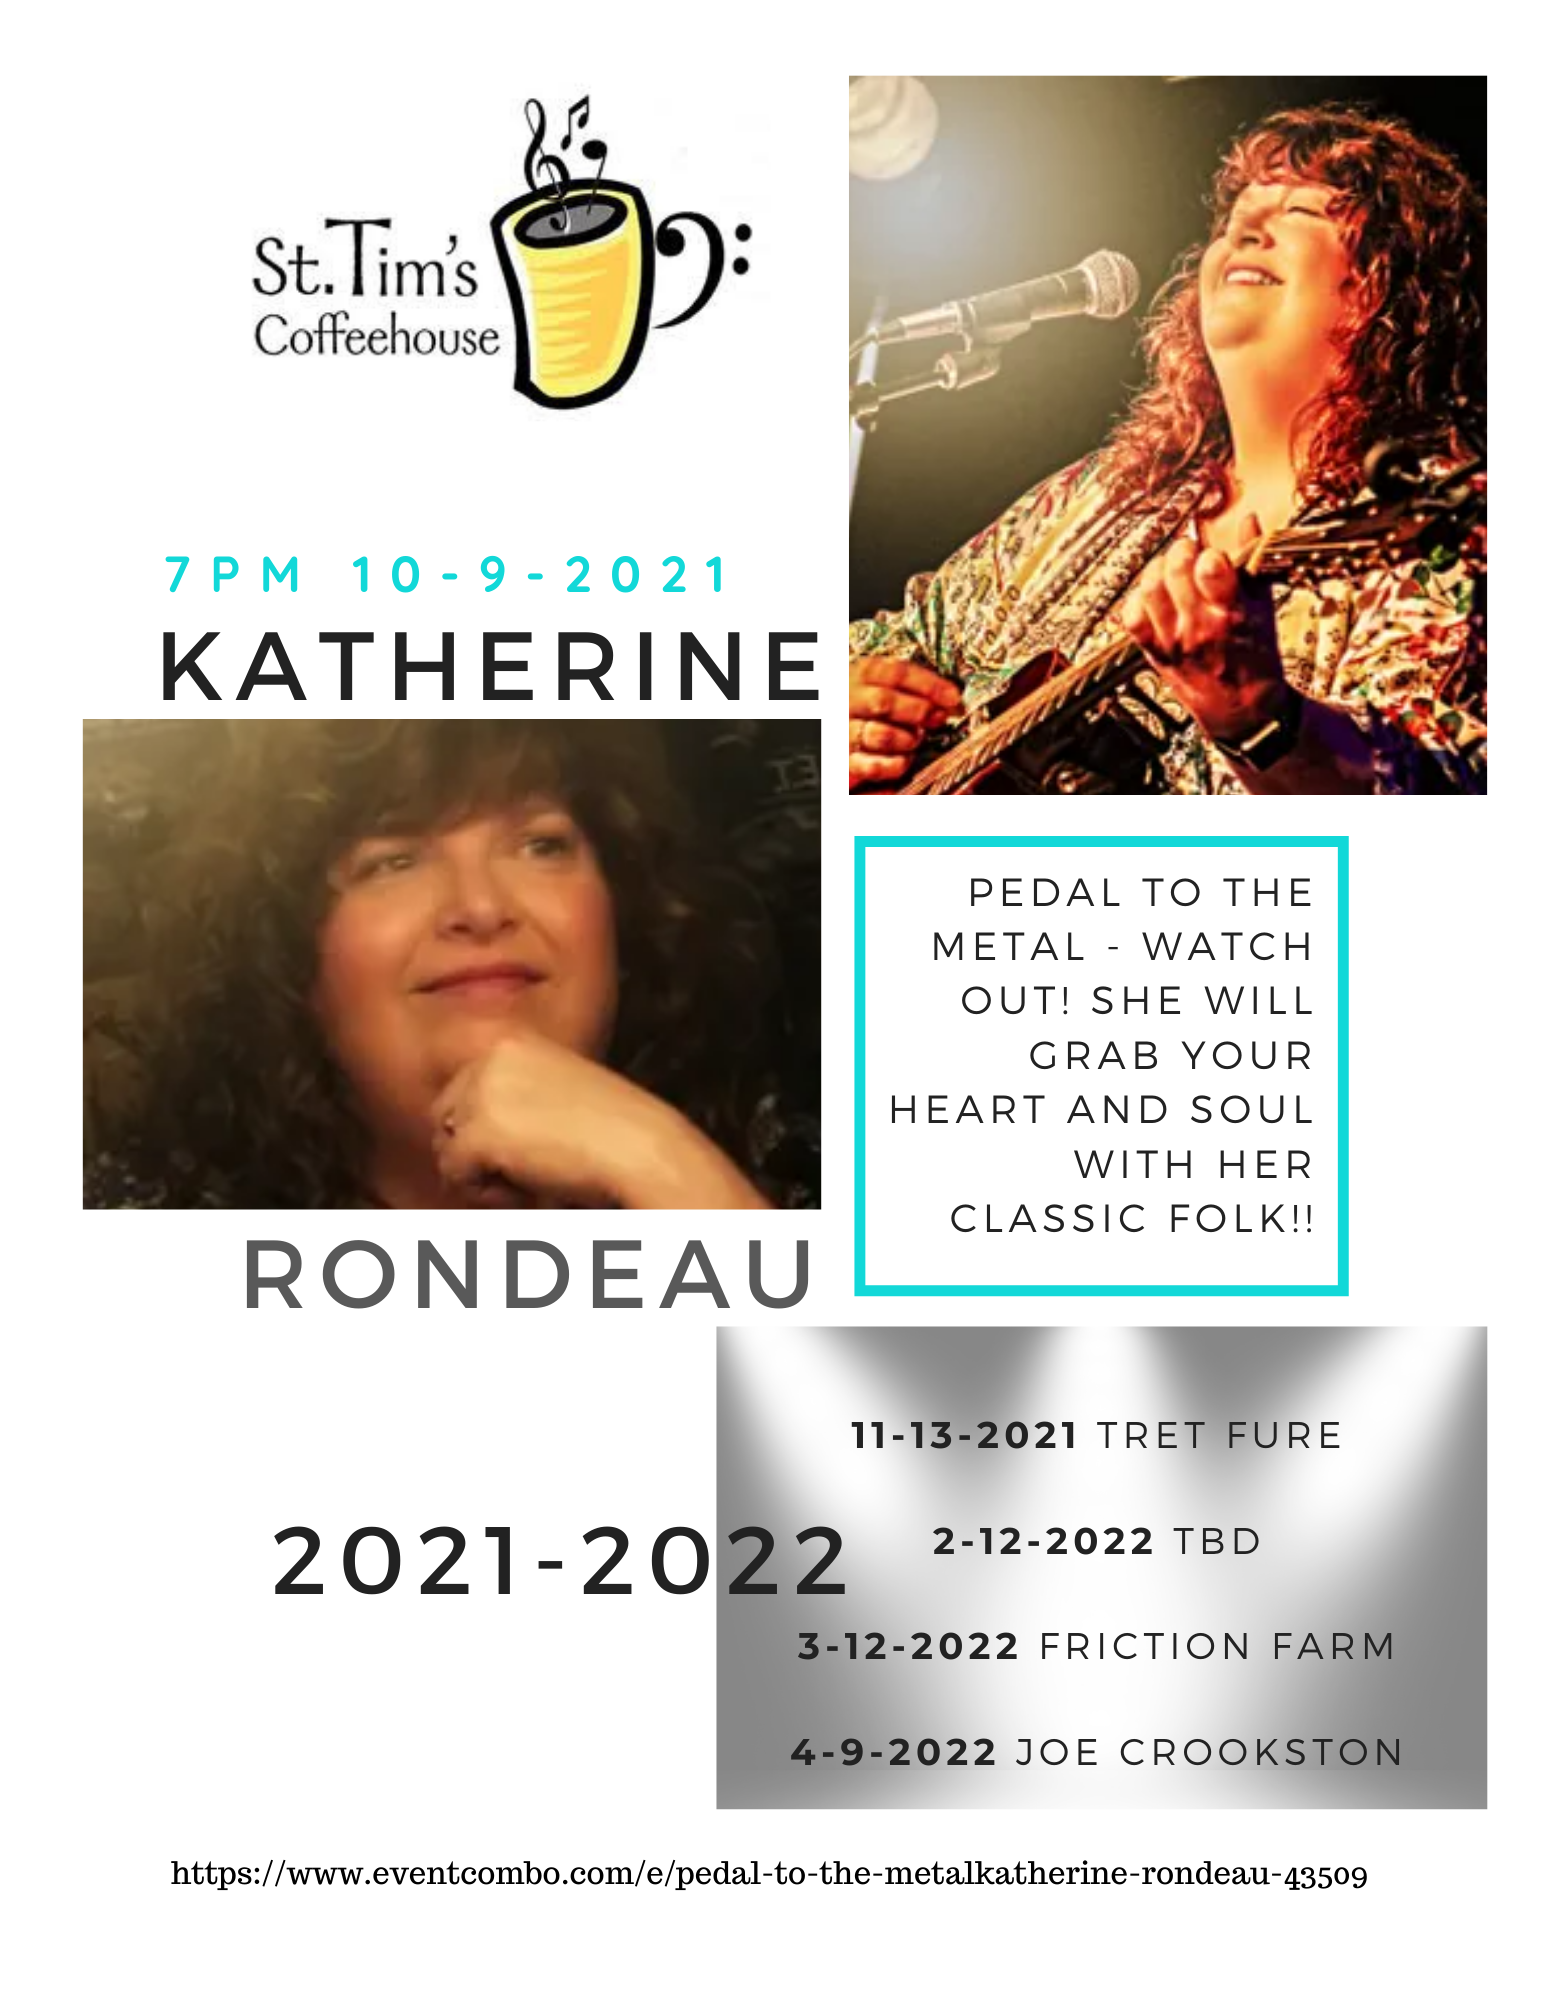 Pedal to the Metal...Katherine Rondeau!